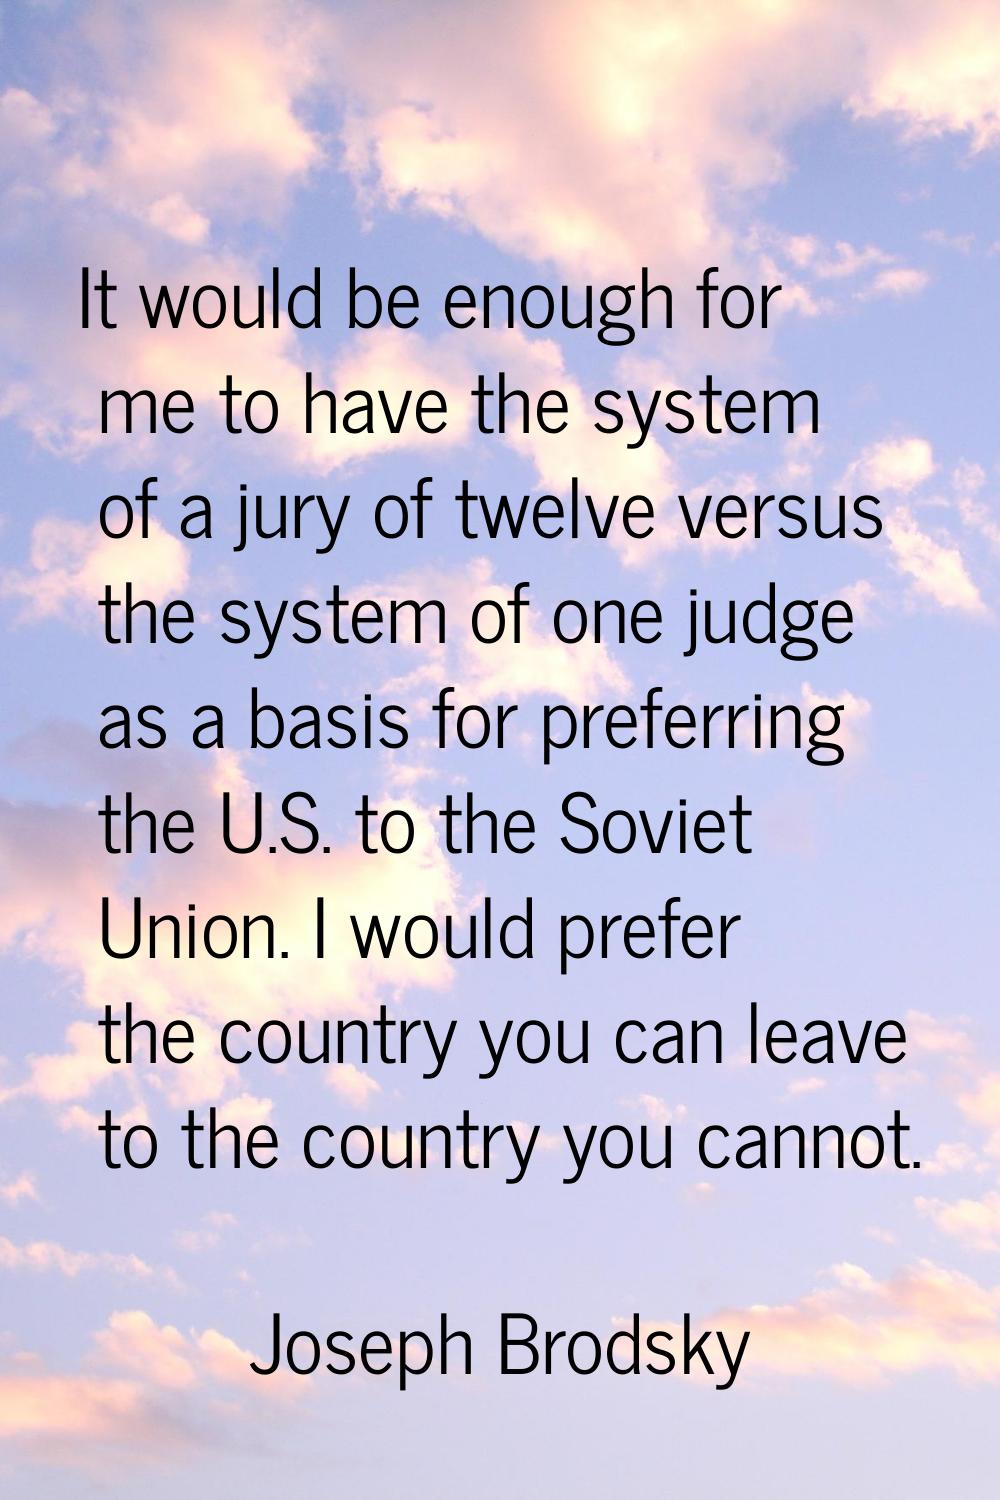 It would be enough for me to have the system of a jury of twelve versus the system of one judge as 